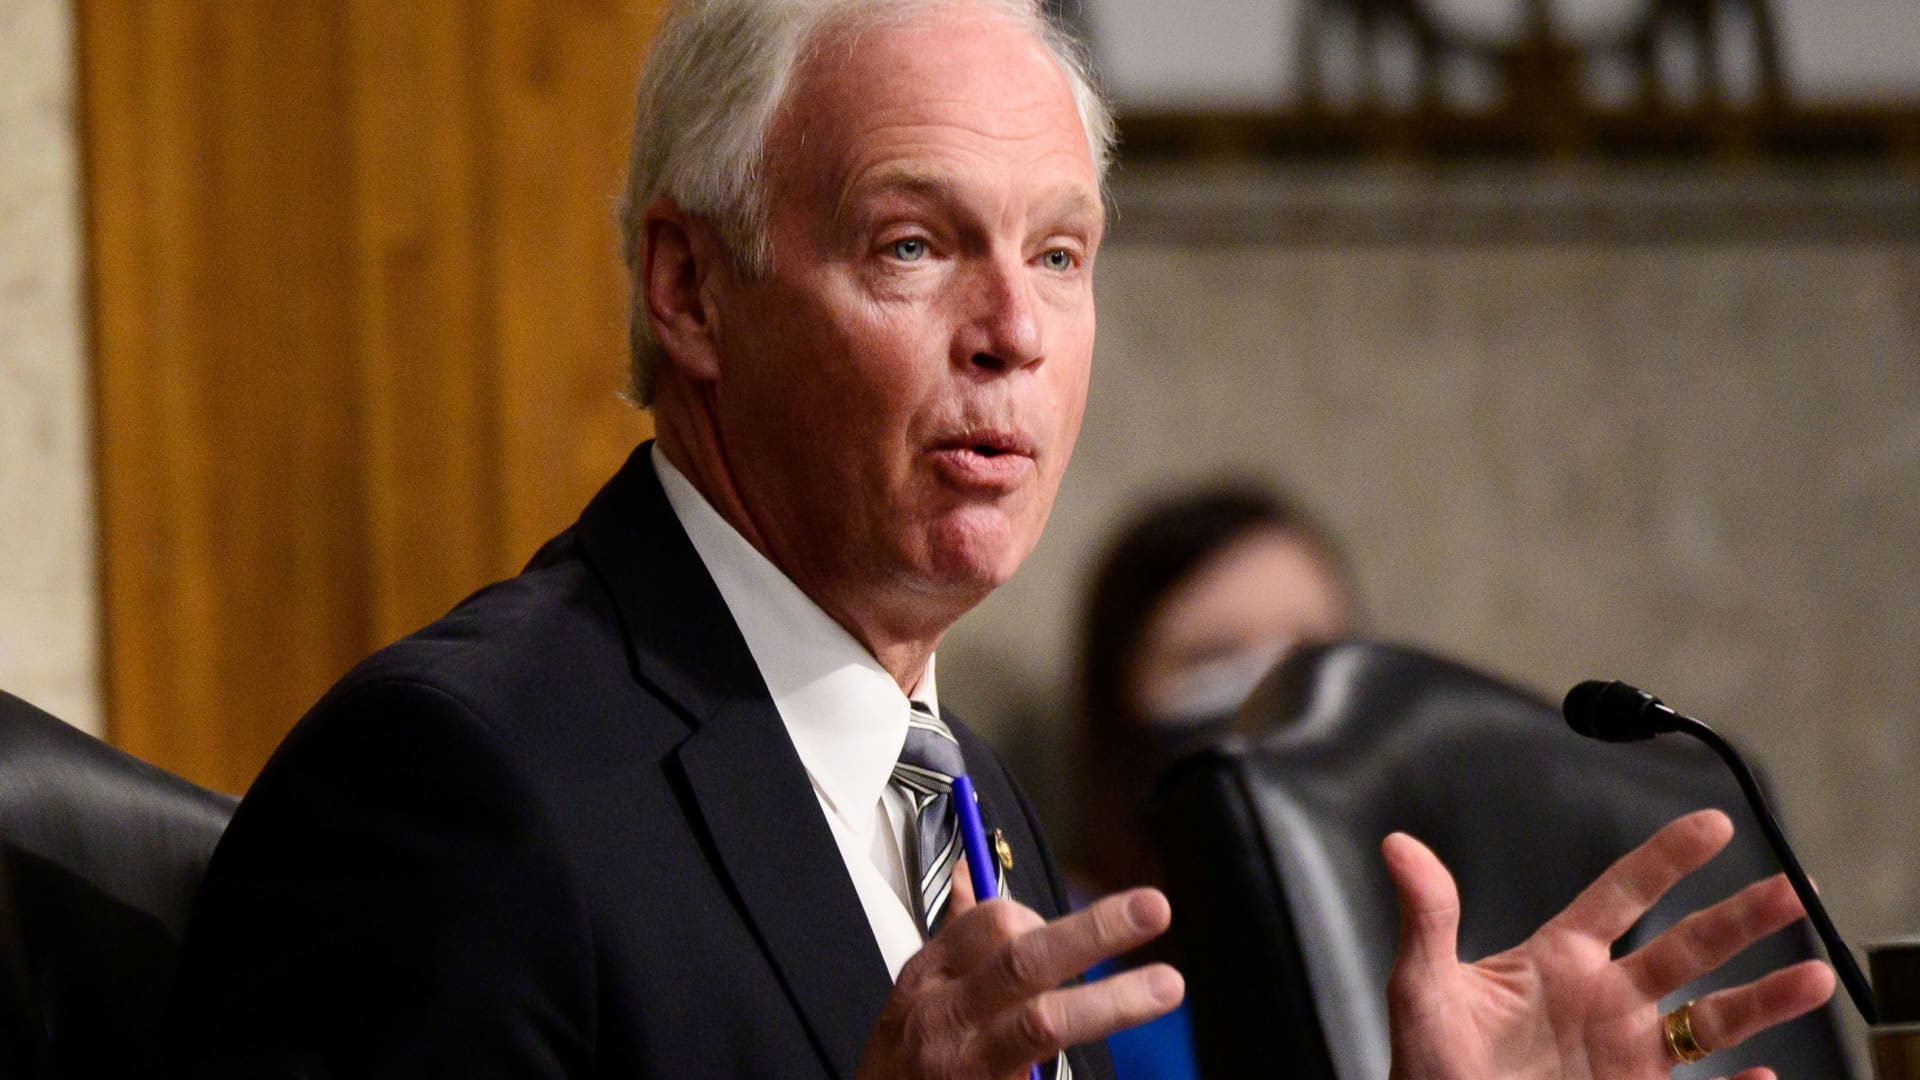 Sen. Ron Johnson, R-Wisc., participates in a Senate Homeland Security and Governmental Affairs and Senate Rules and Administration committees joint hearing on Capitol Hill, Washington, February 23, 2021, to examine the January 6th attack on the Capitol.